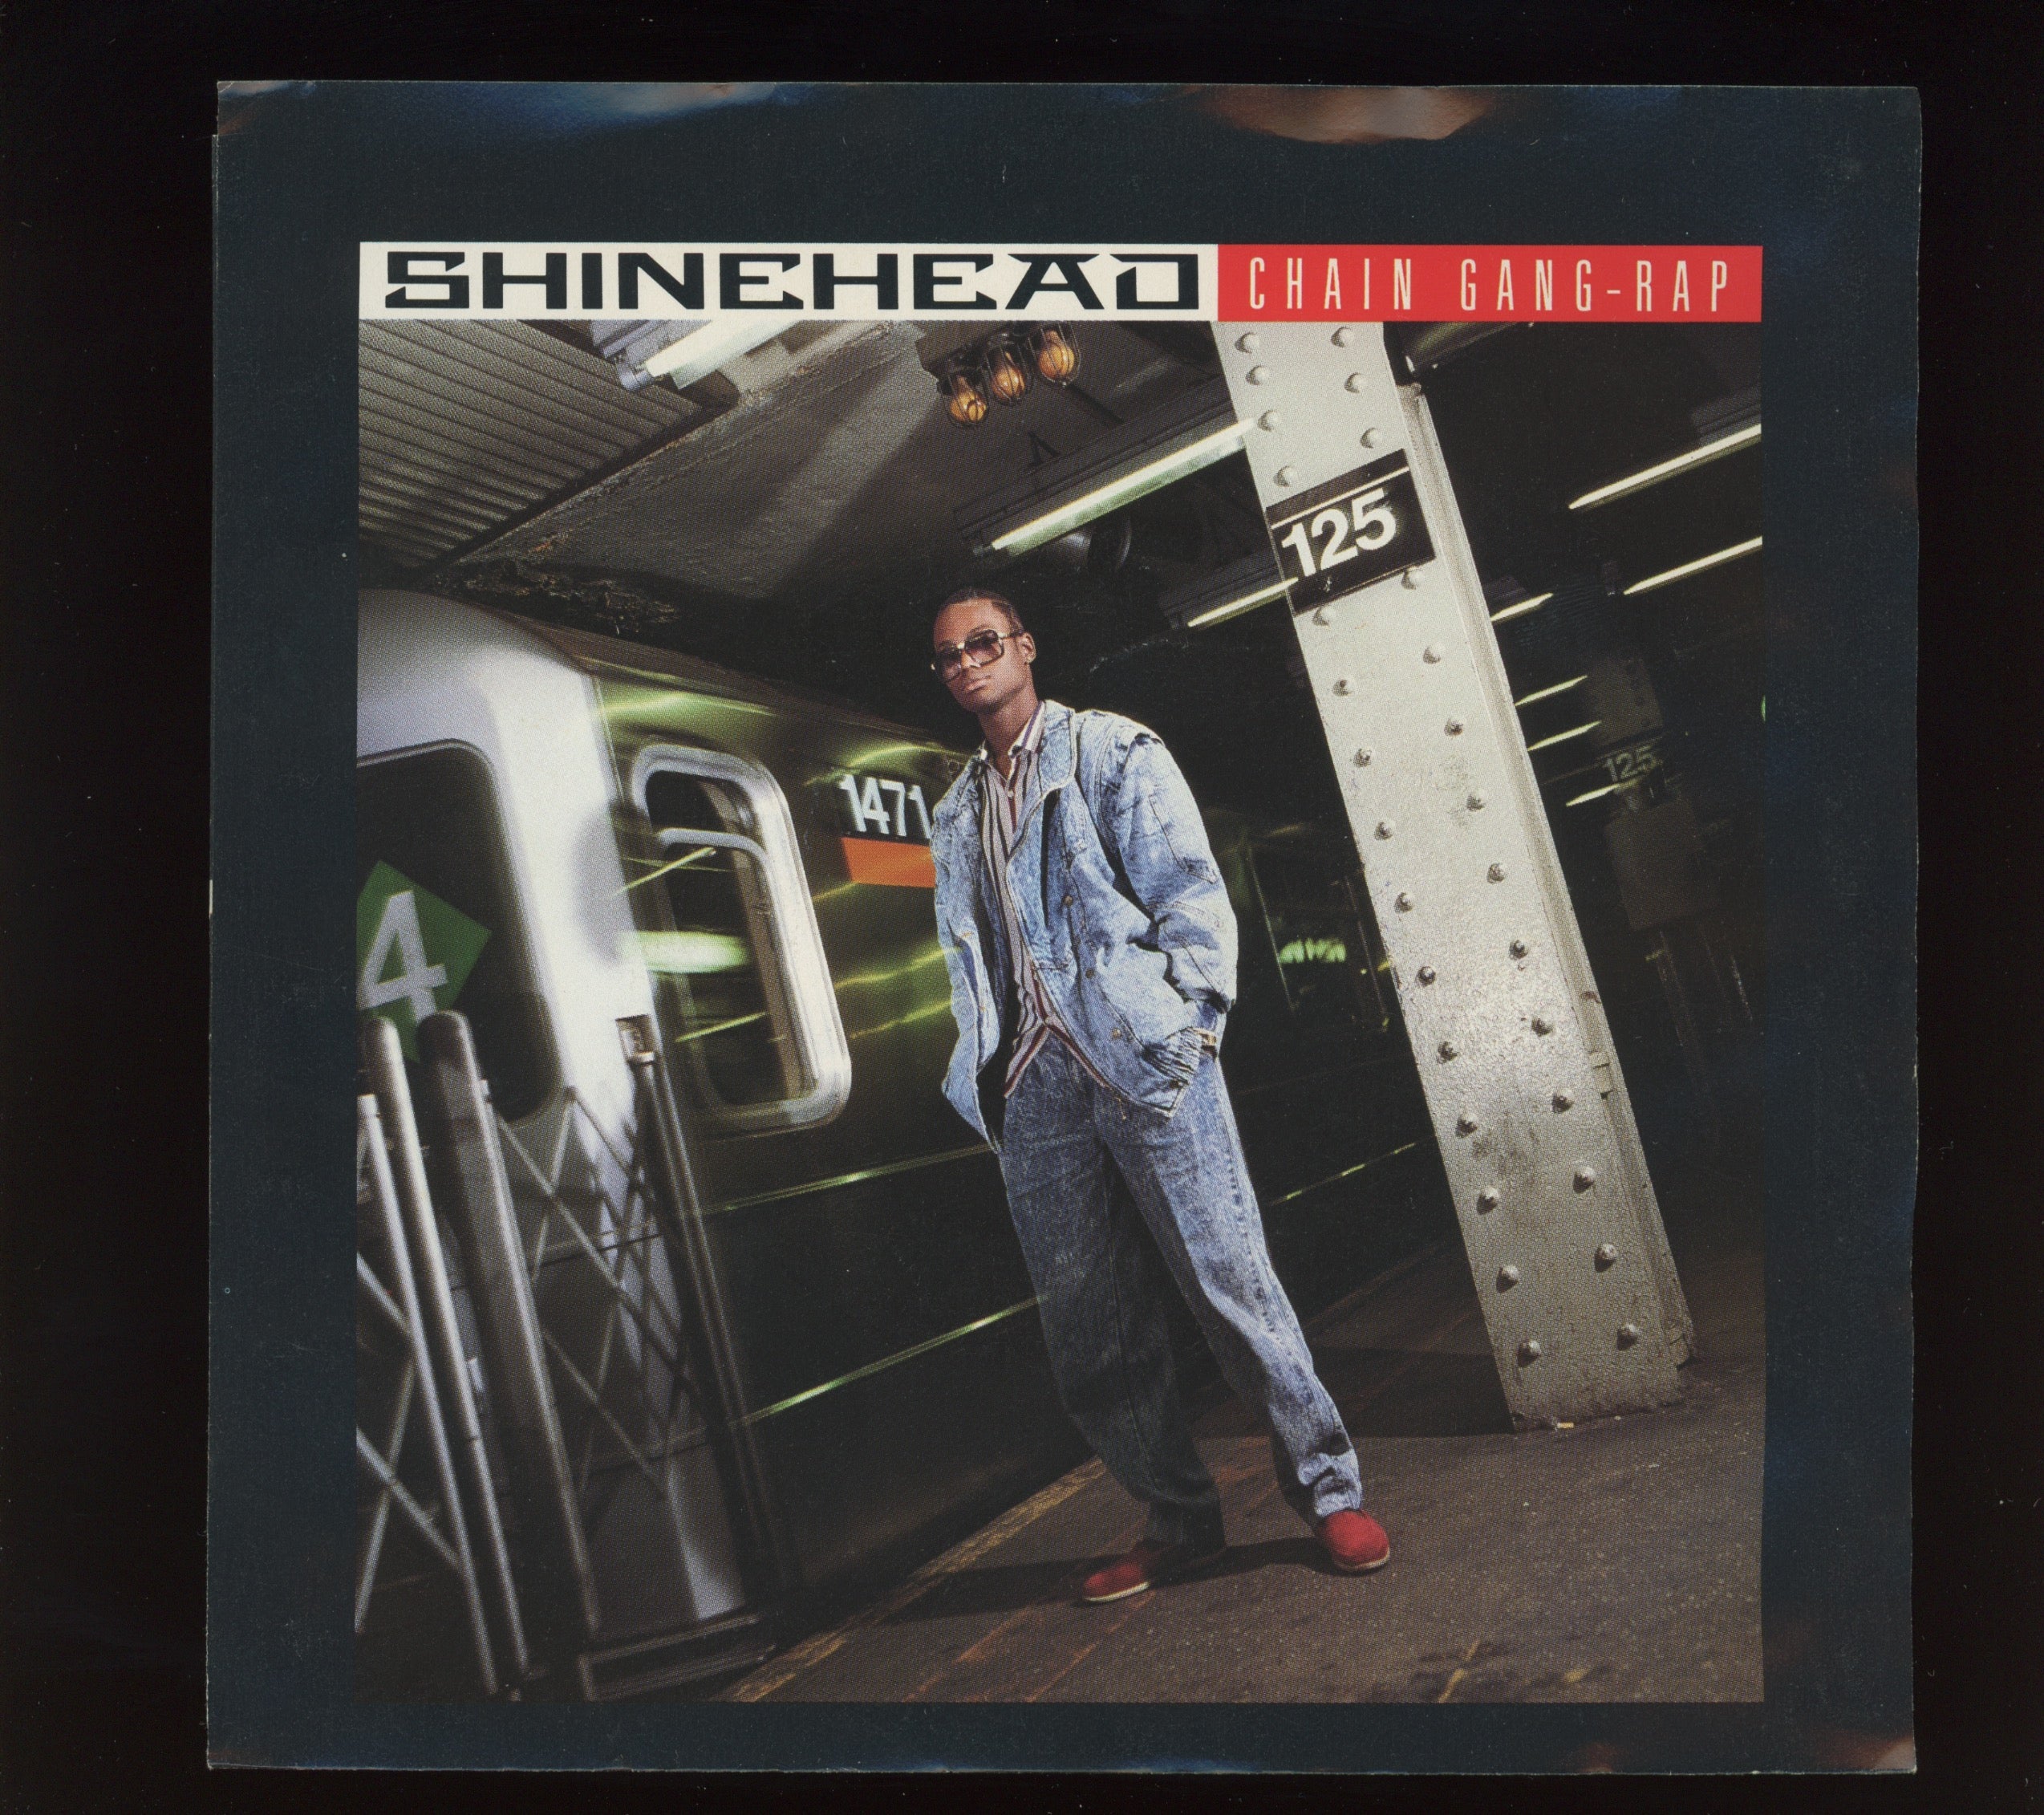 Shinehead - Chain Gang - Rap on Elektra Promo With Picture Sleeve